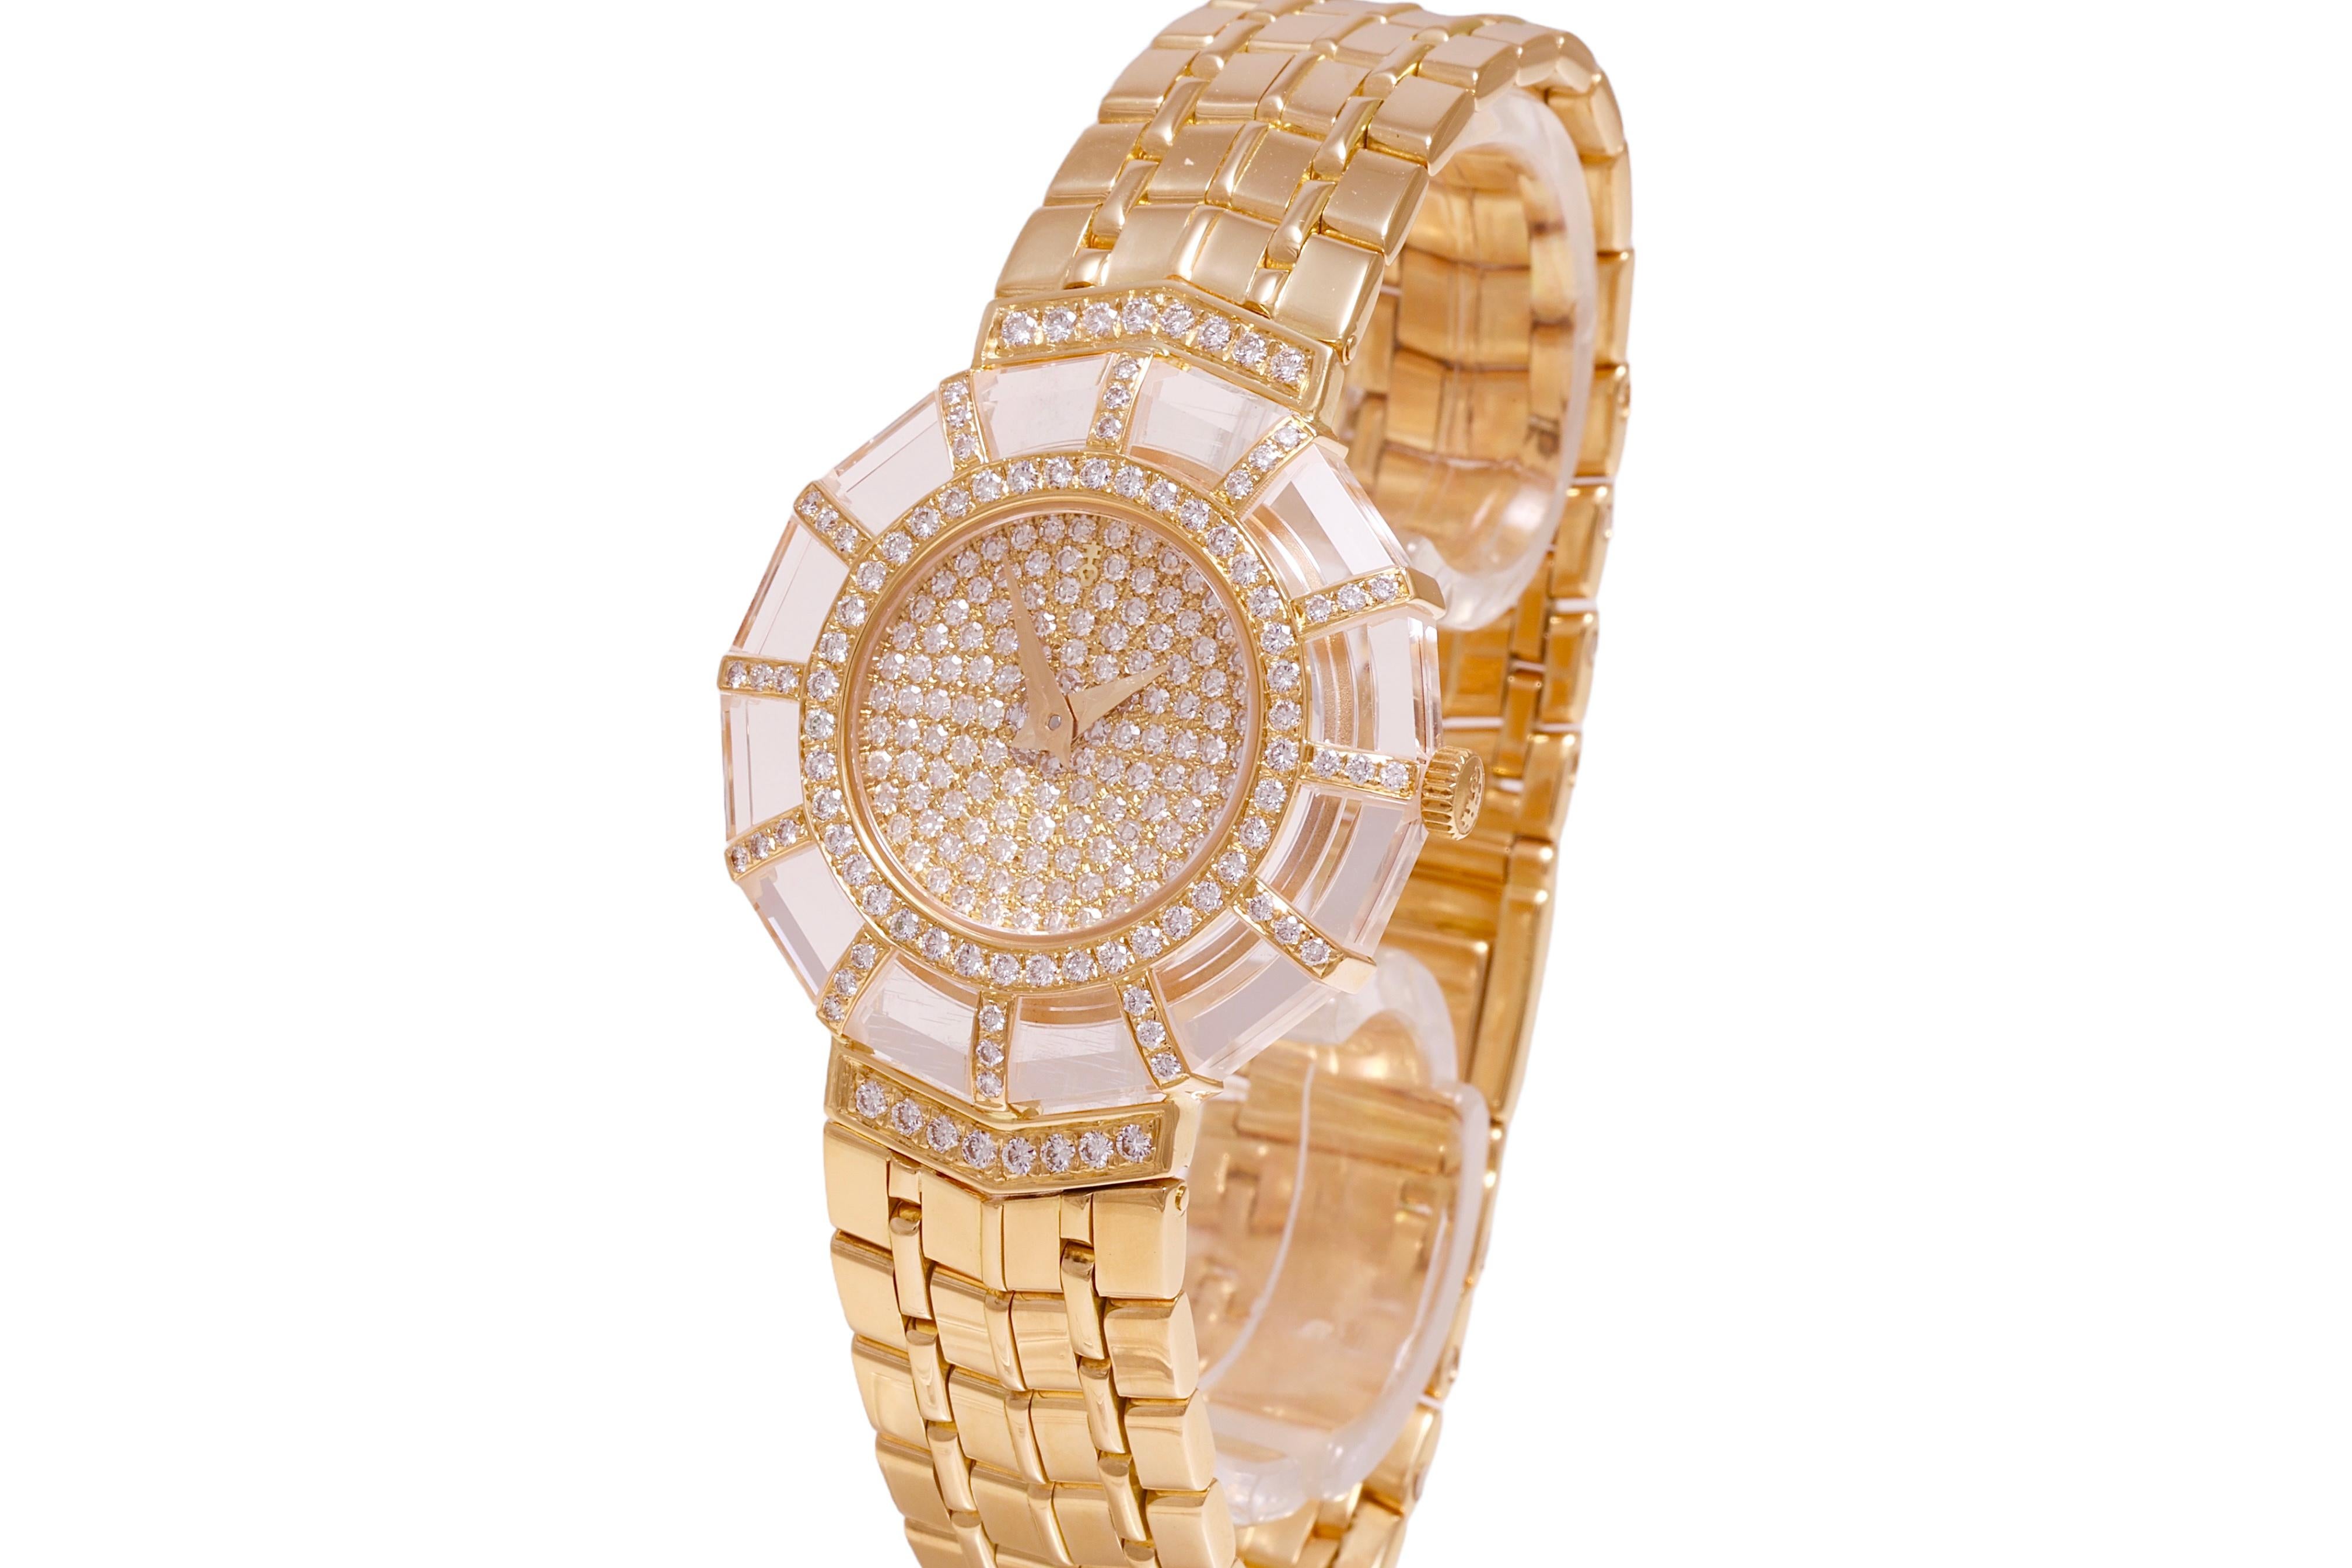 18 kt Yellow Gold Corum Ladies Watch Limelight Pave-Set Diamonds

Reference number: 24.786.65

Movement: Quartz

Functions: Hours, Minutes

Dial: Pave-set diamond circular dial and dodecagonal surround, with similarly-set chevron lugs 

Case: 18 kt